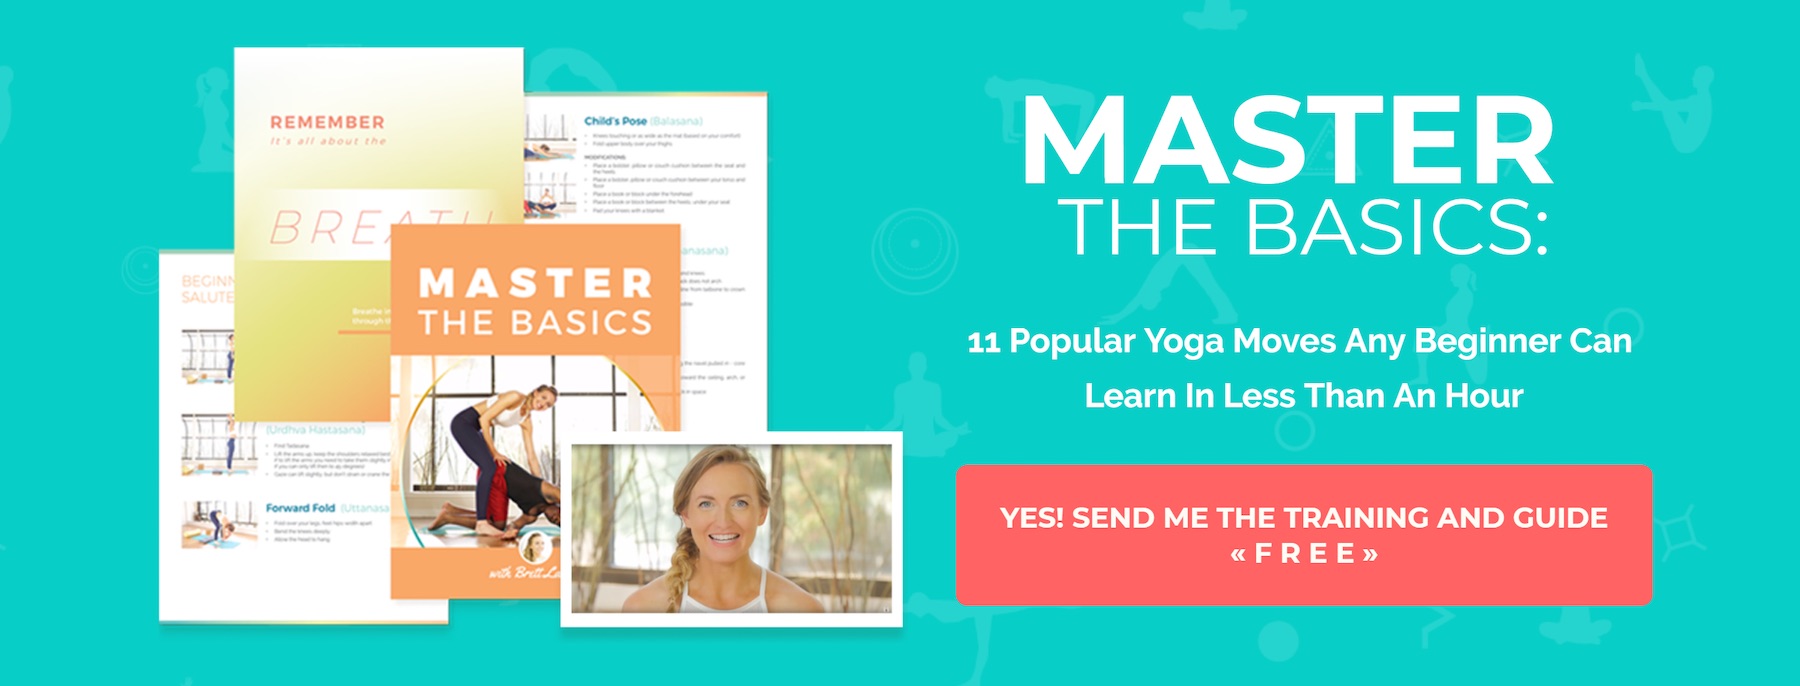 Master The Basics: Get the free guide and training now